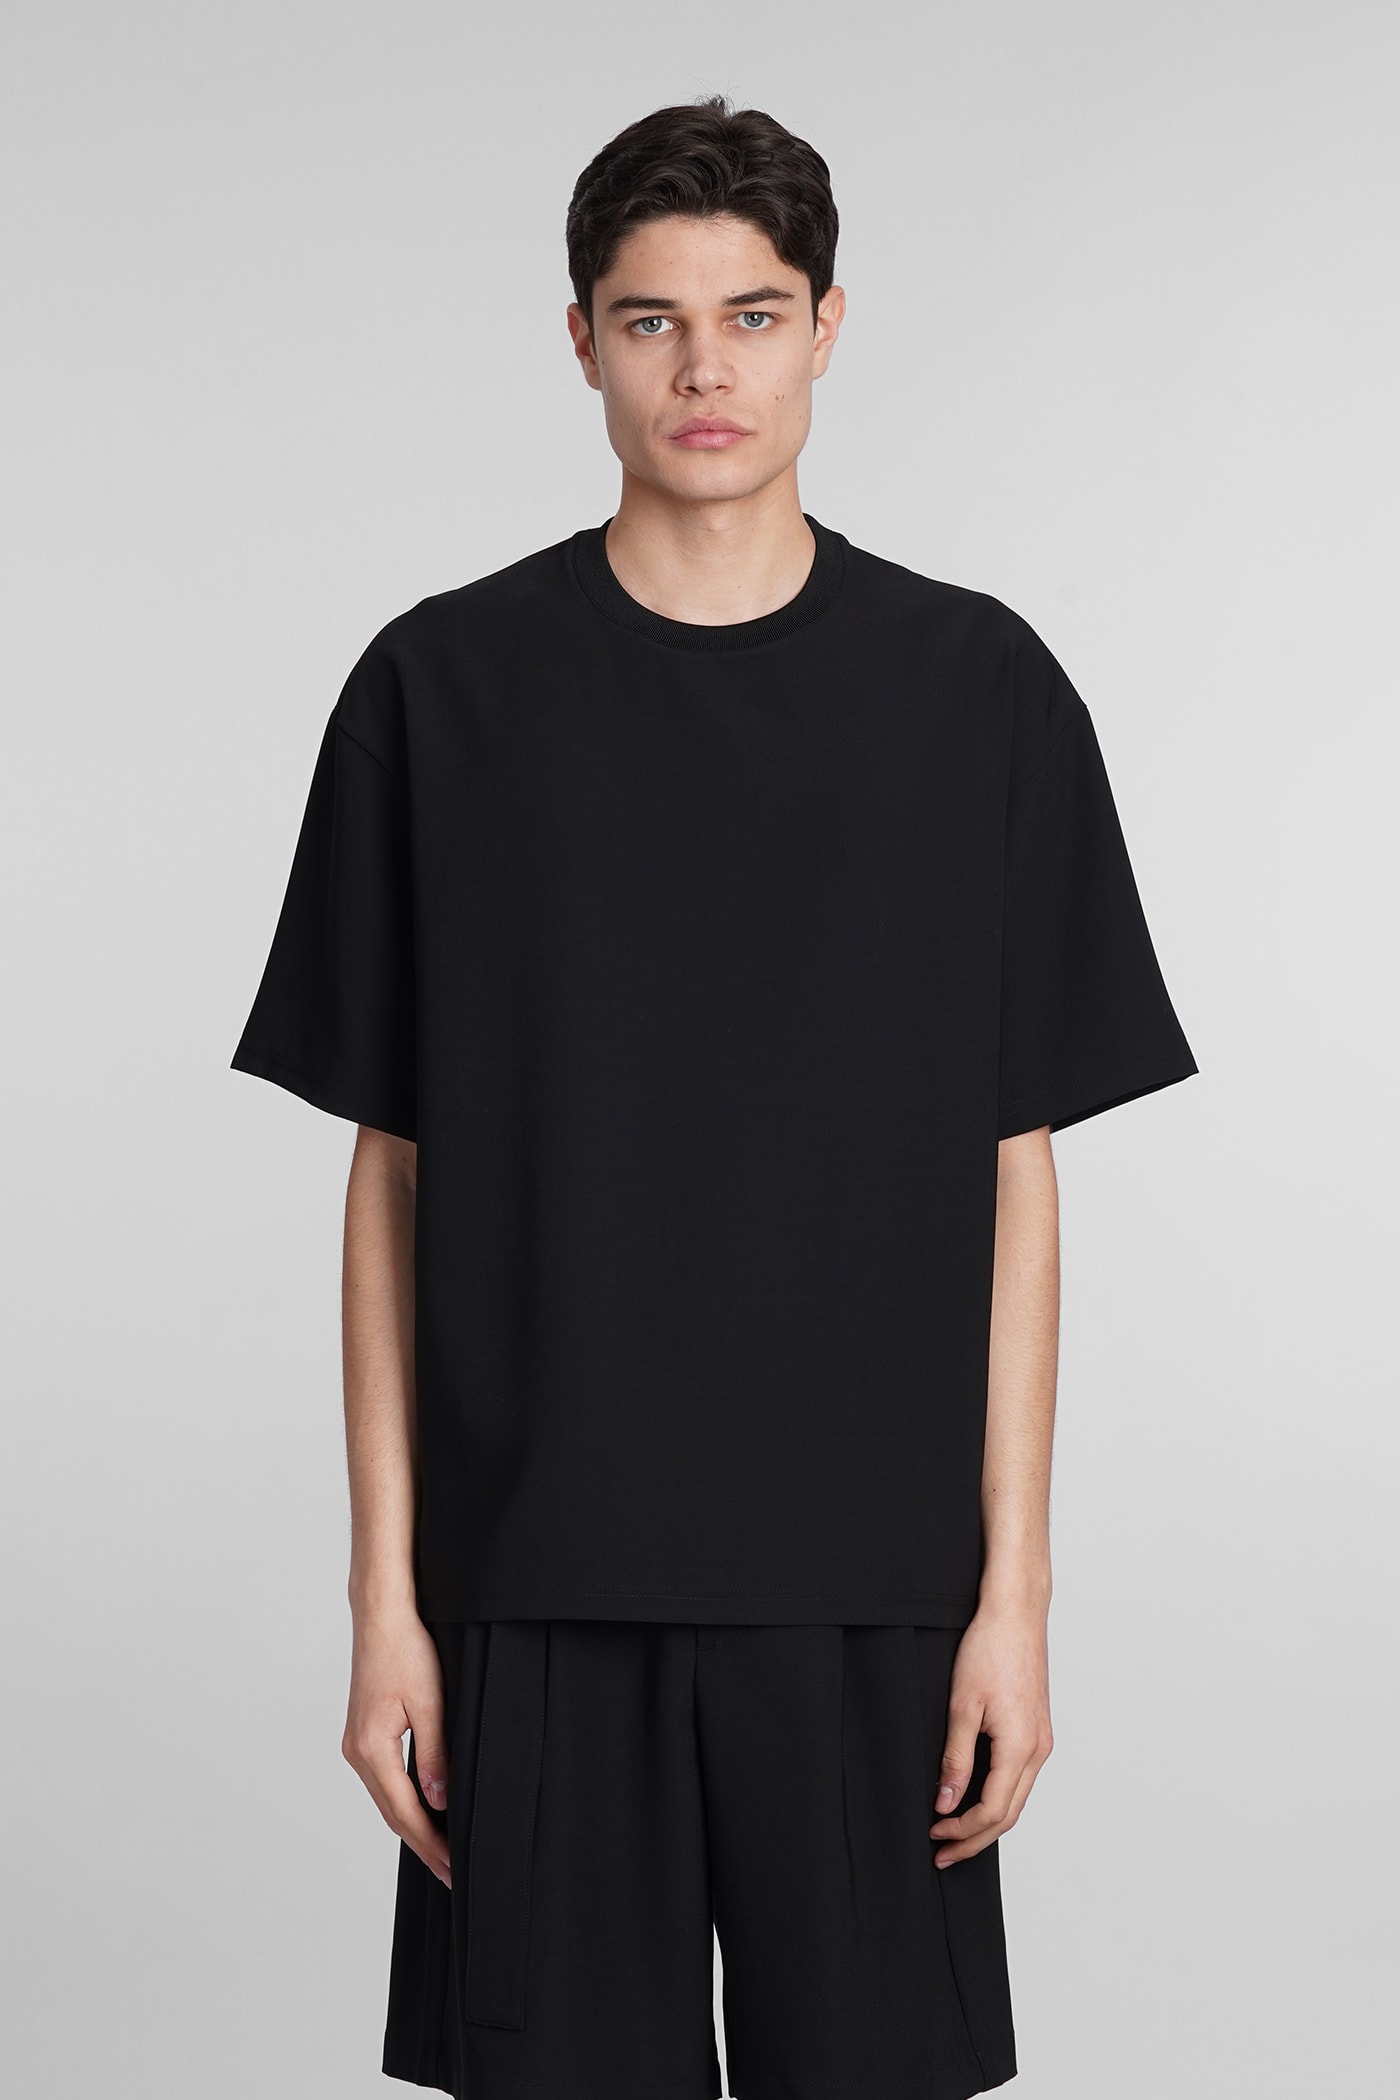 ATTACHMENT T-SHIRT IN BLACK POLYESTER